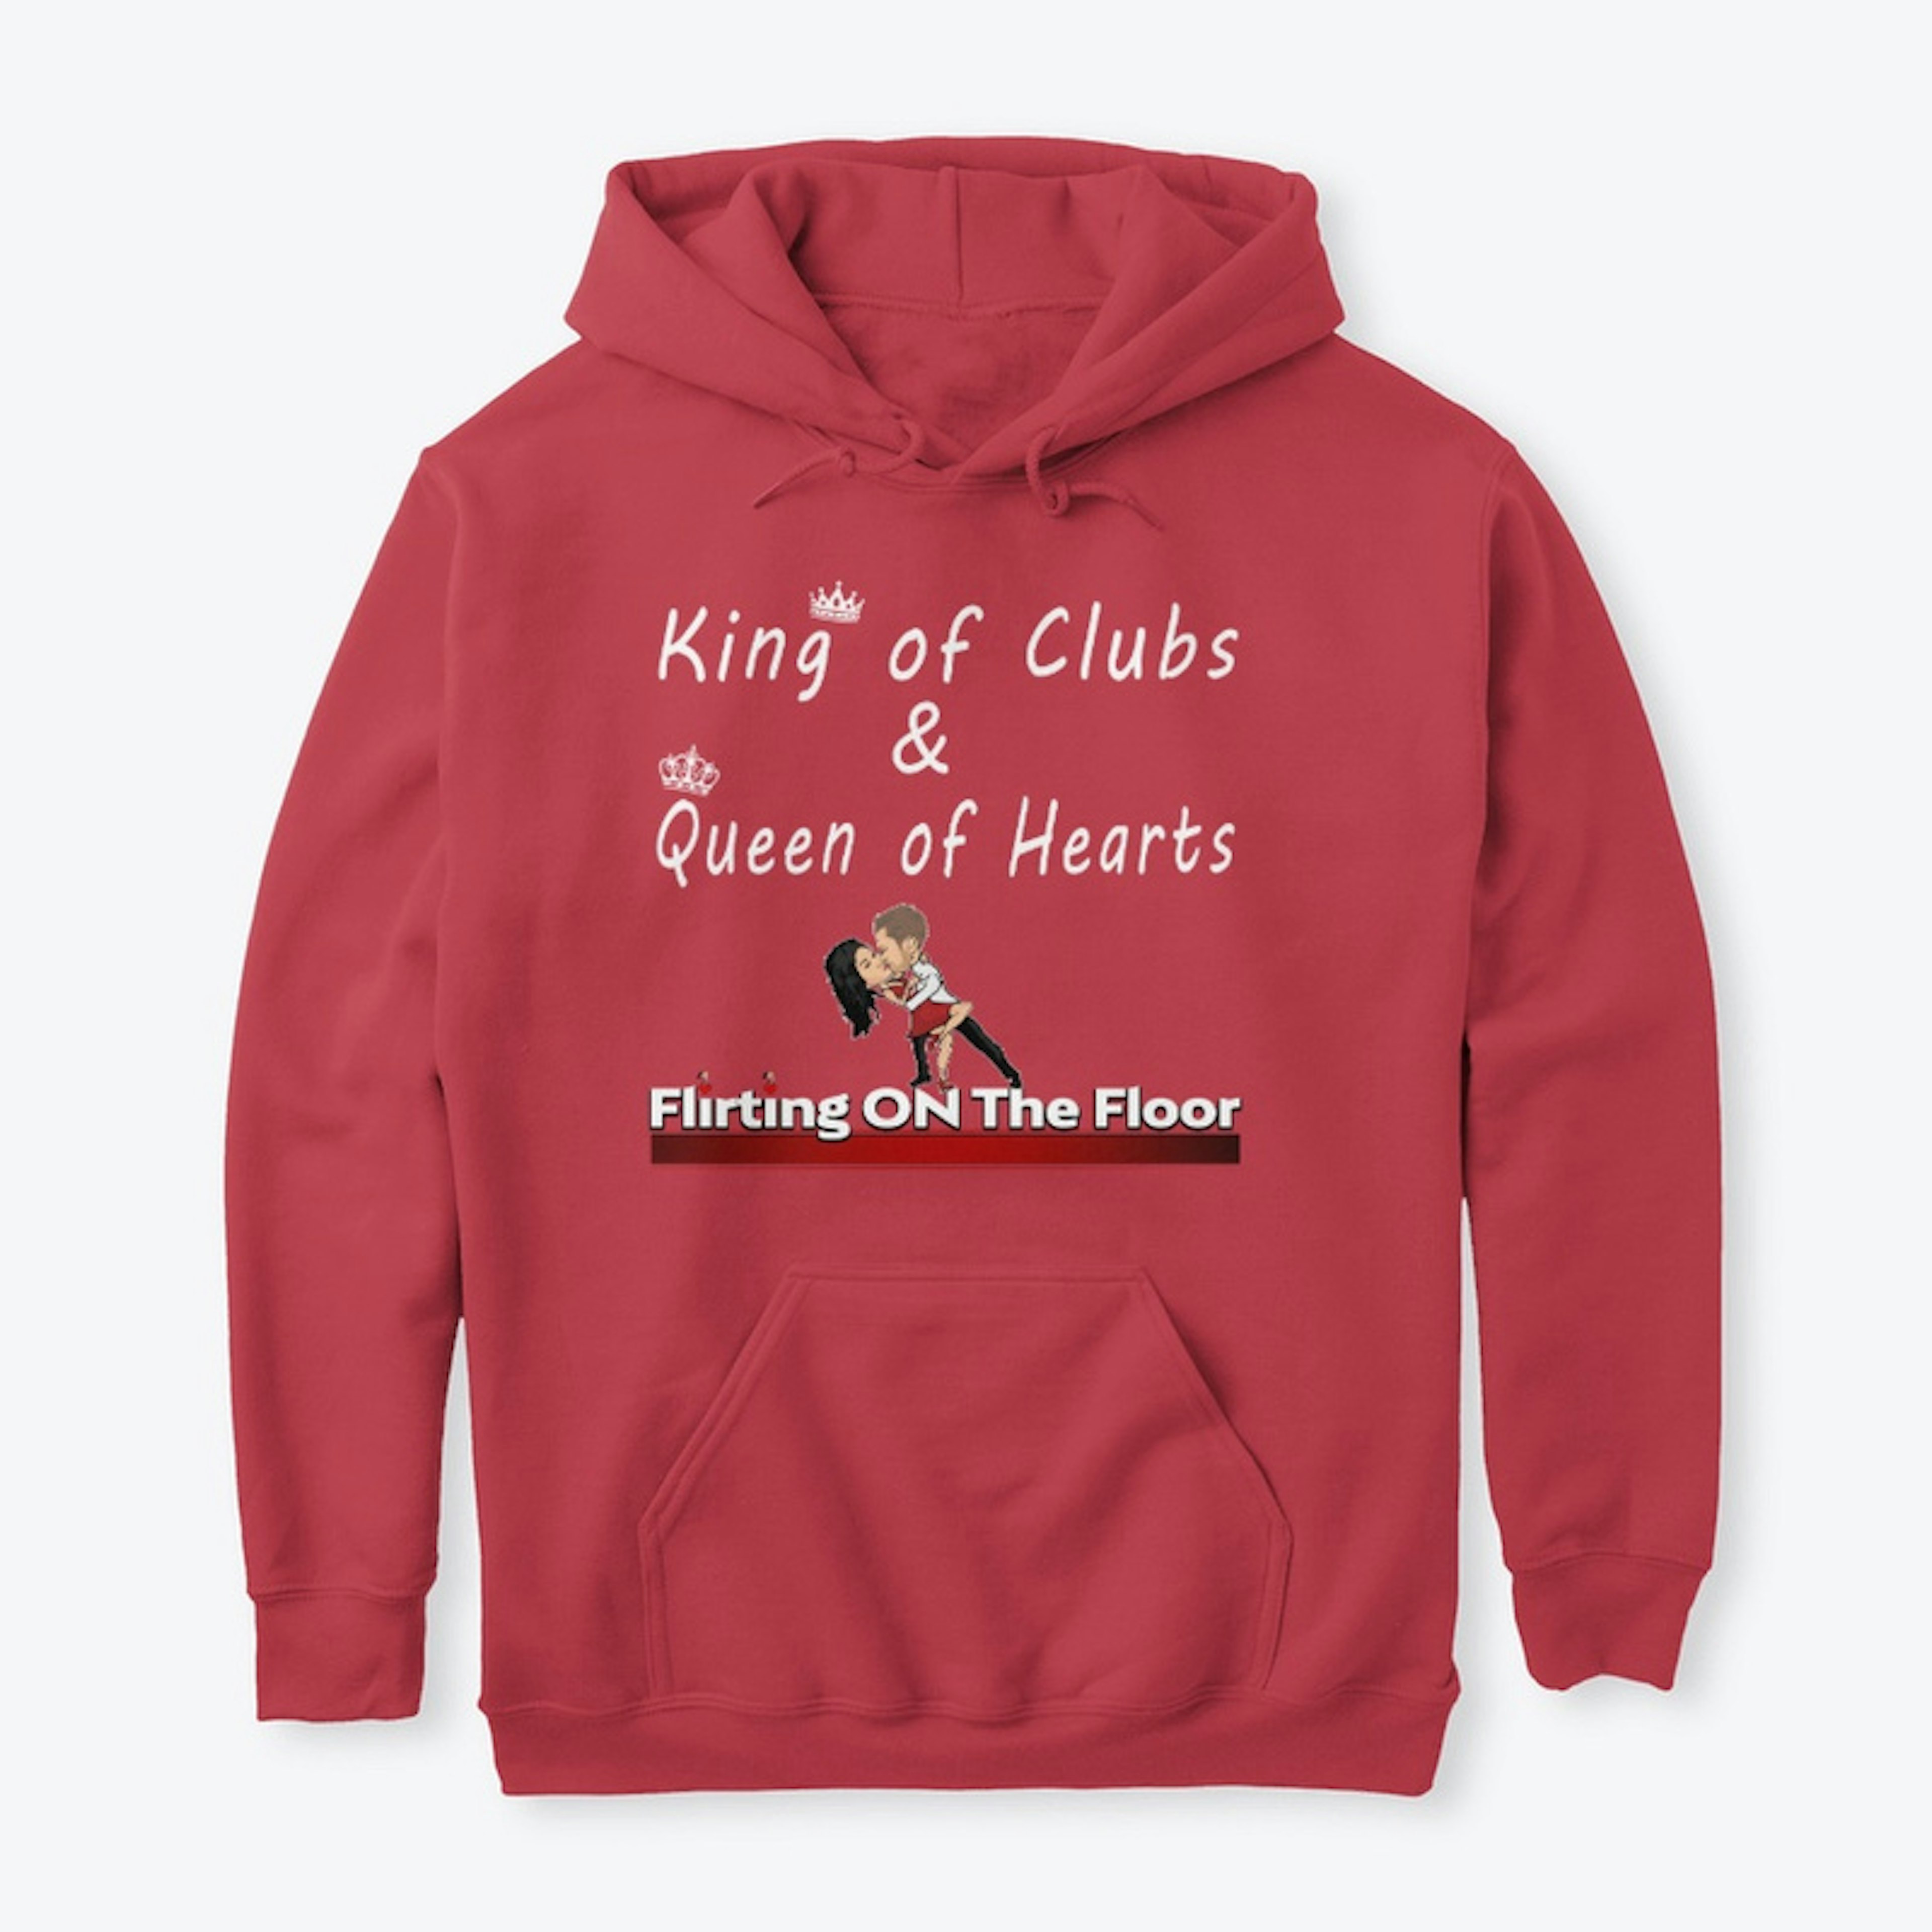 King of clubs and queen of hearts